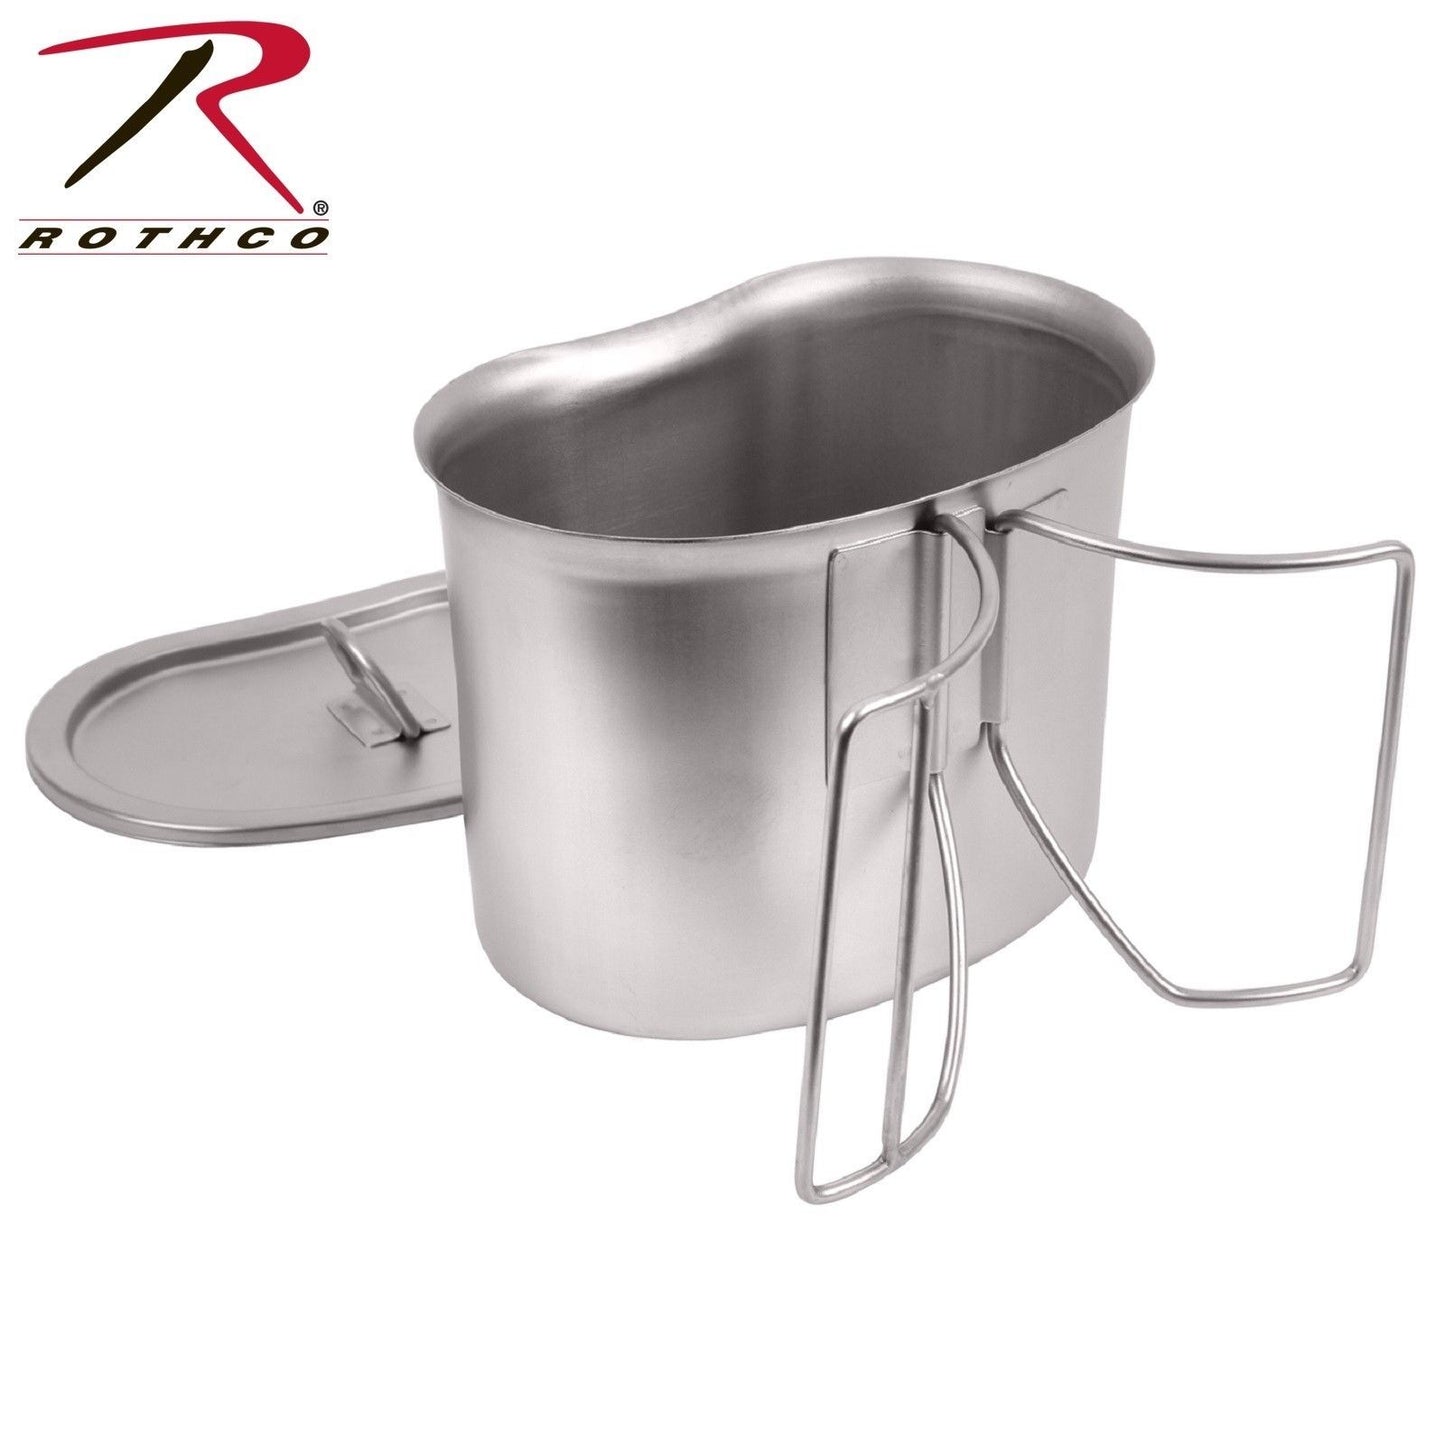 Rothco Stainless Steel Canteen Cup & Cover Set - Camping Hiking Survival